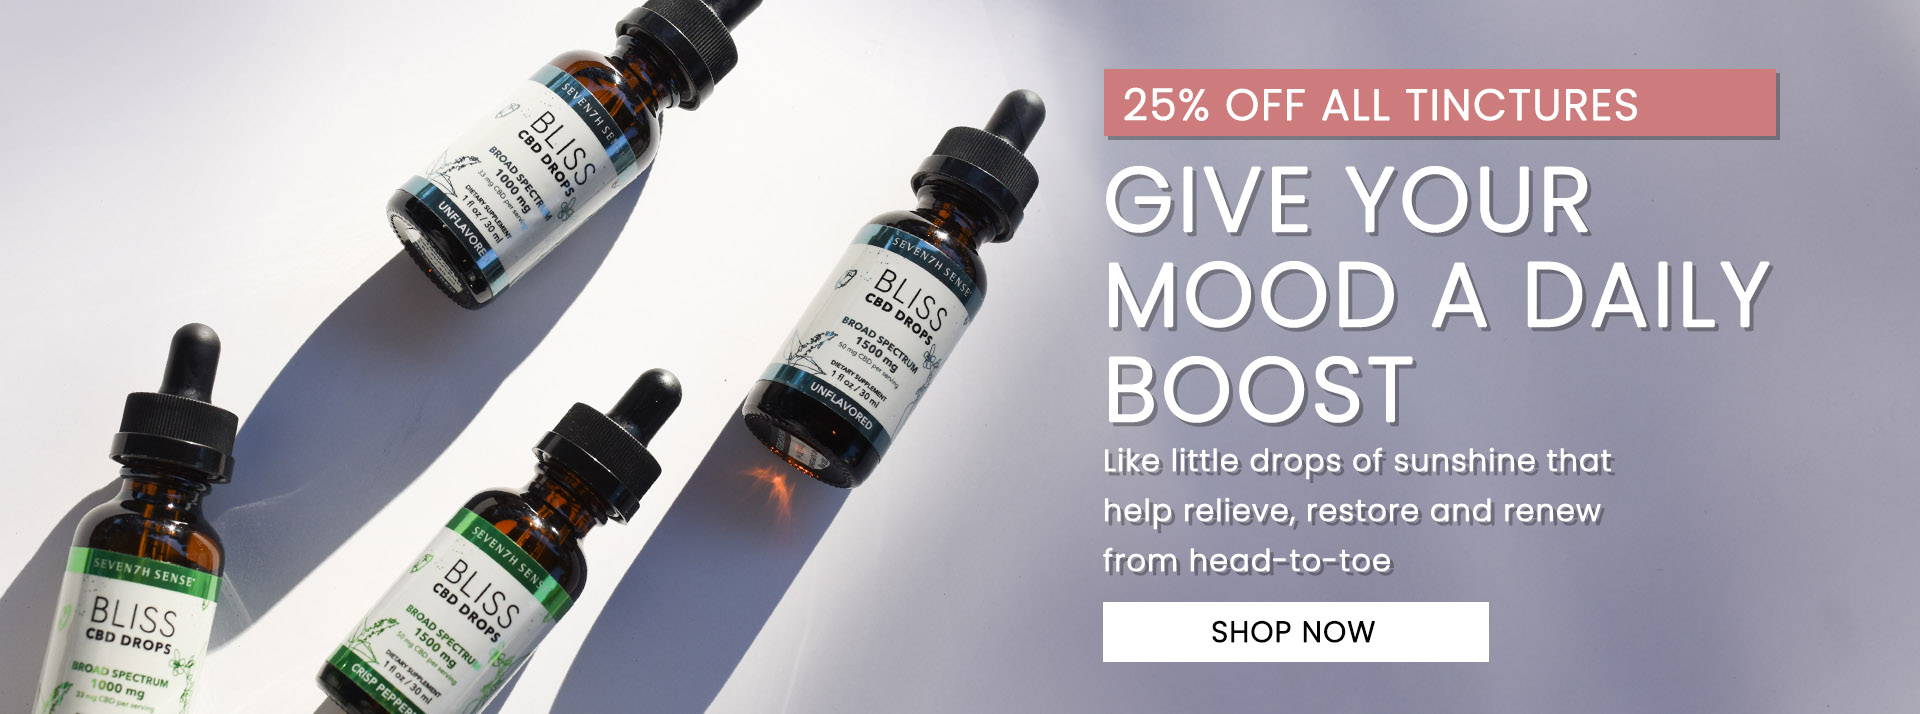 25% Off All Tinctures. Give your mood a daily boost.